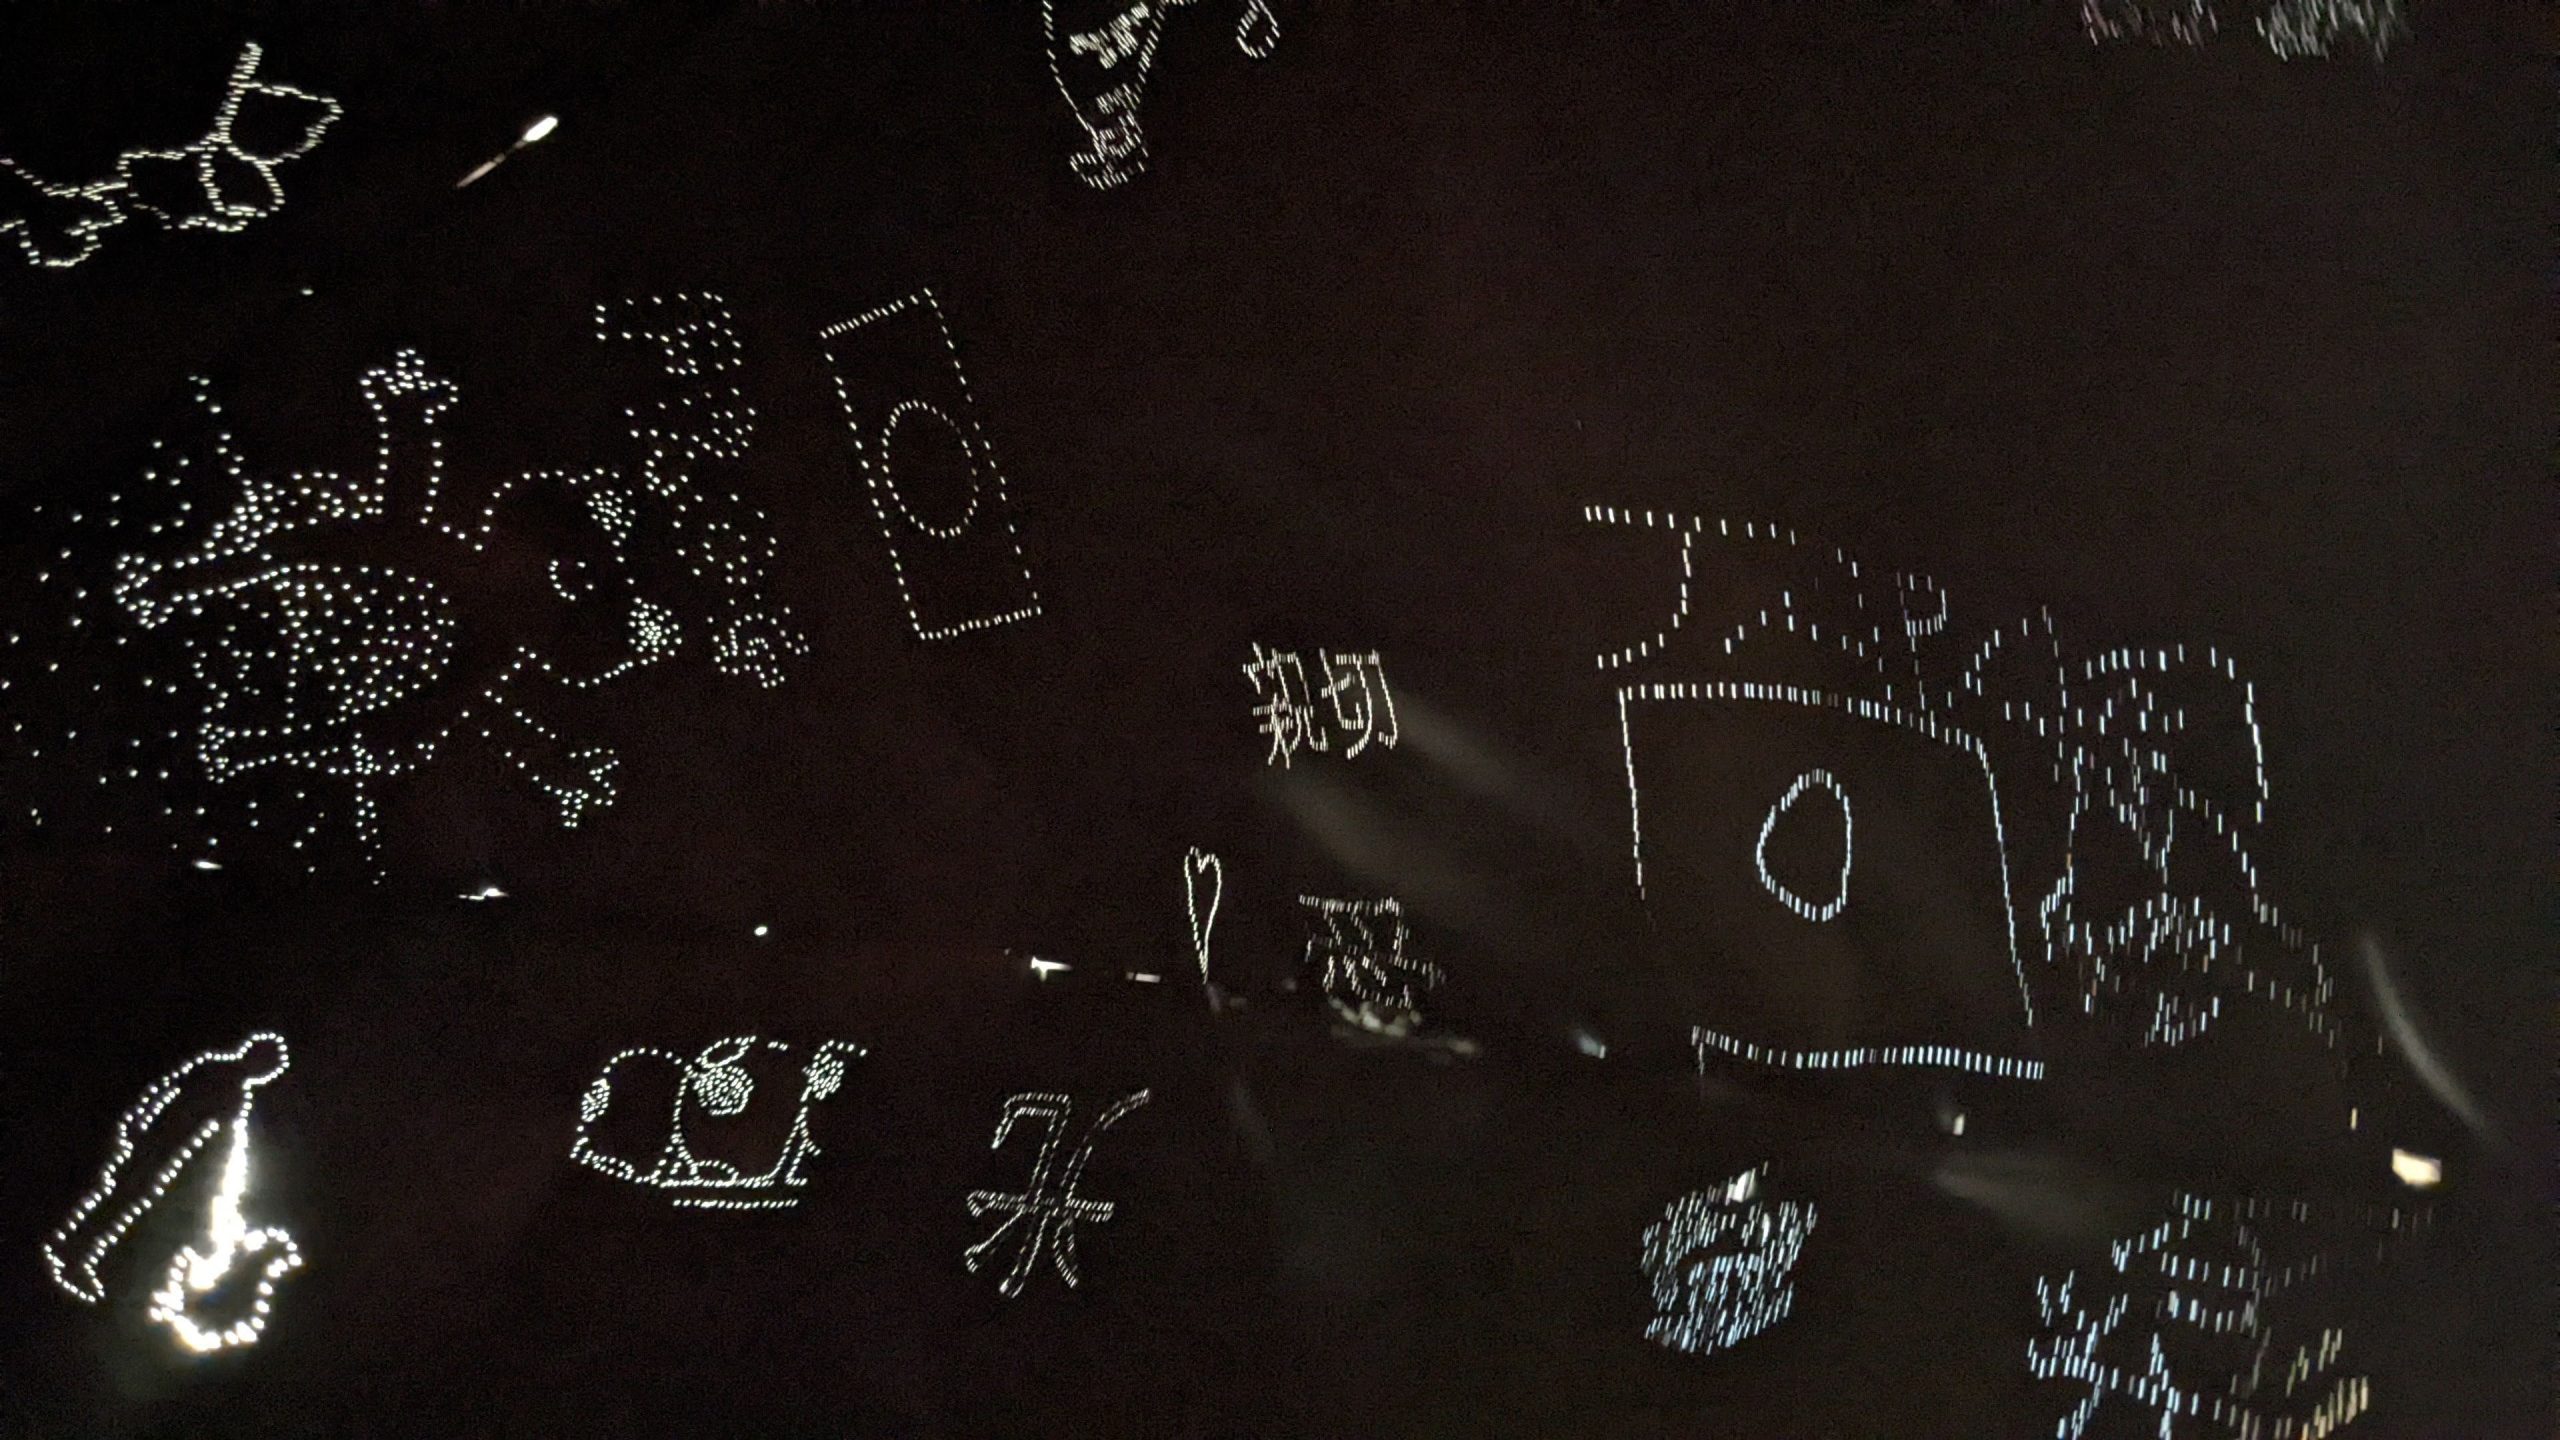 A black background has drawings made of dots of light. Drawings include a happy cartoon-like frog, the Japanese flag, a silhouette of a figure holding hands and the word Japan.